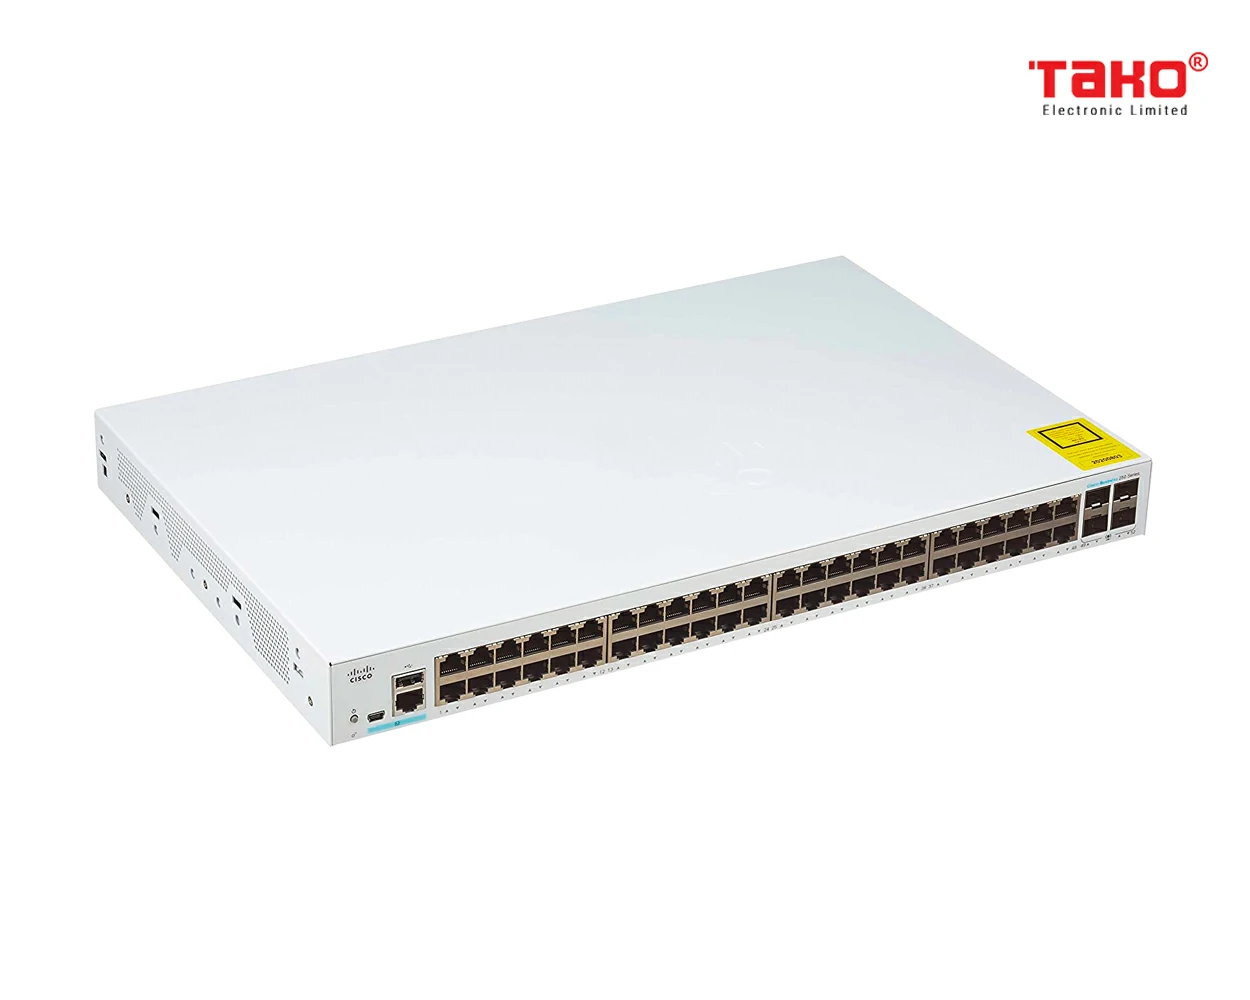 Cisco CBS250-48T-4G 48 port 10/100/1000 Mbps Layer 2 manageable web switch + 4 x 1 Gbps SFP slots 2